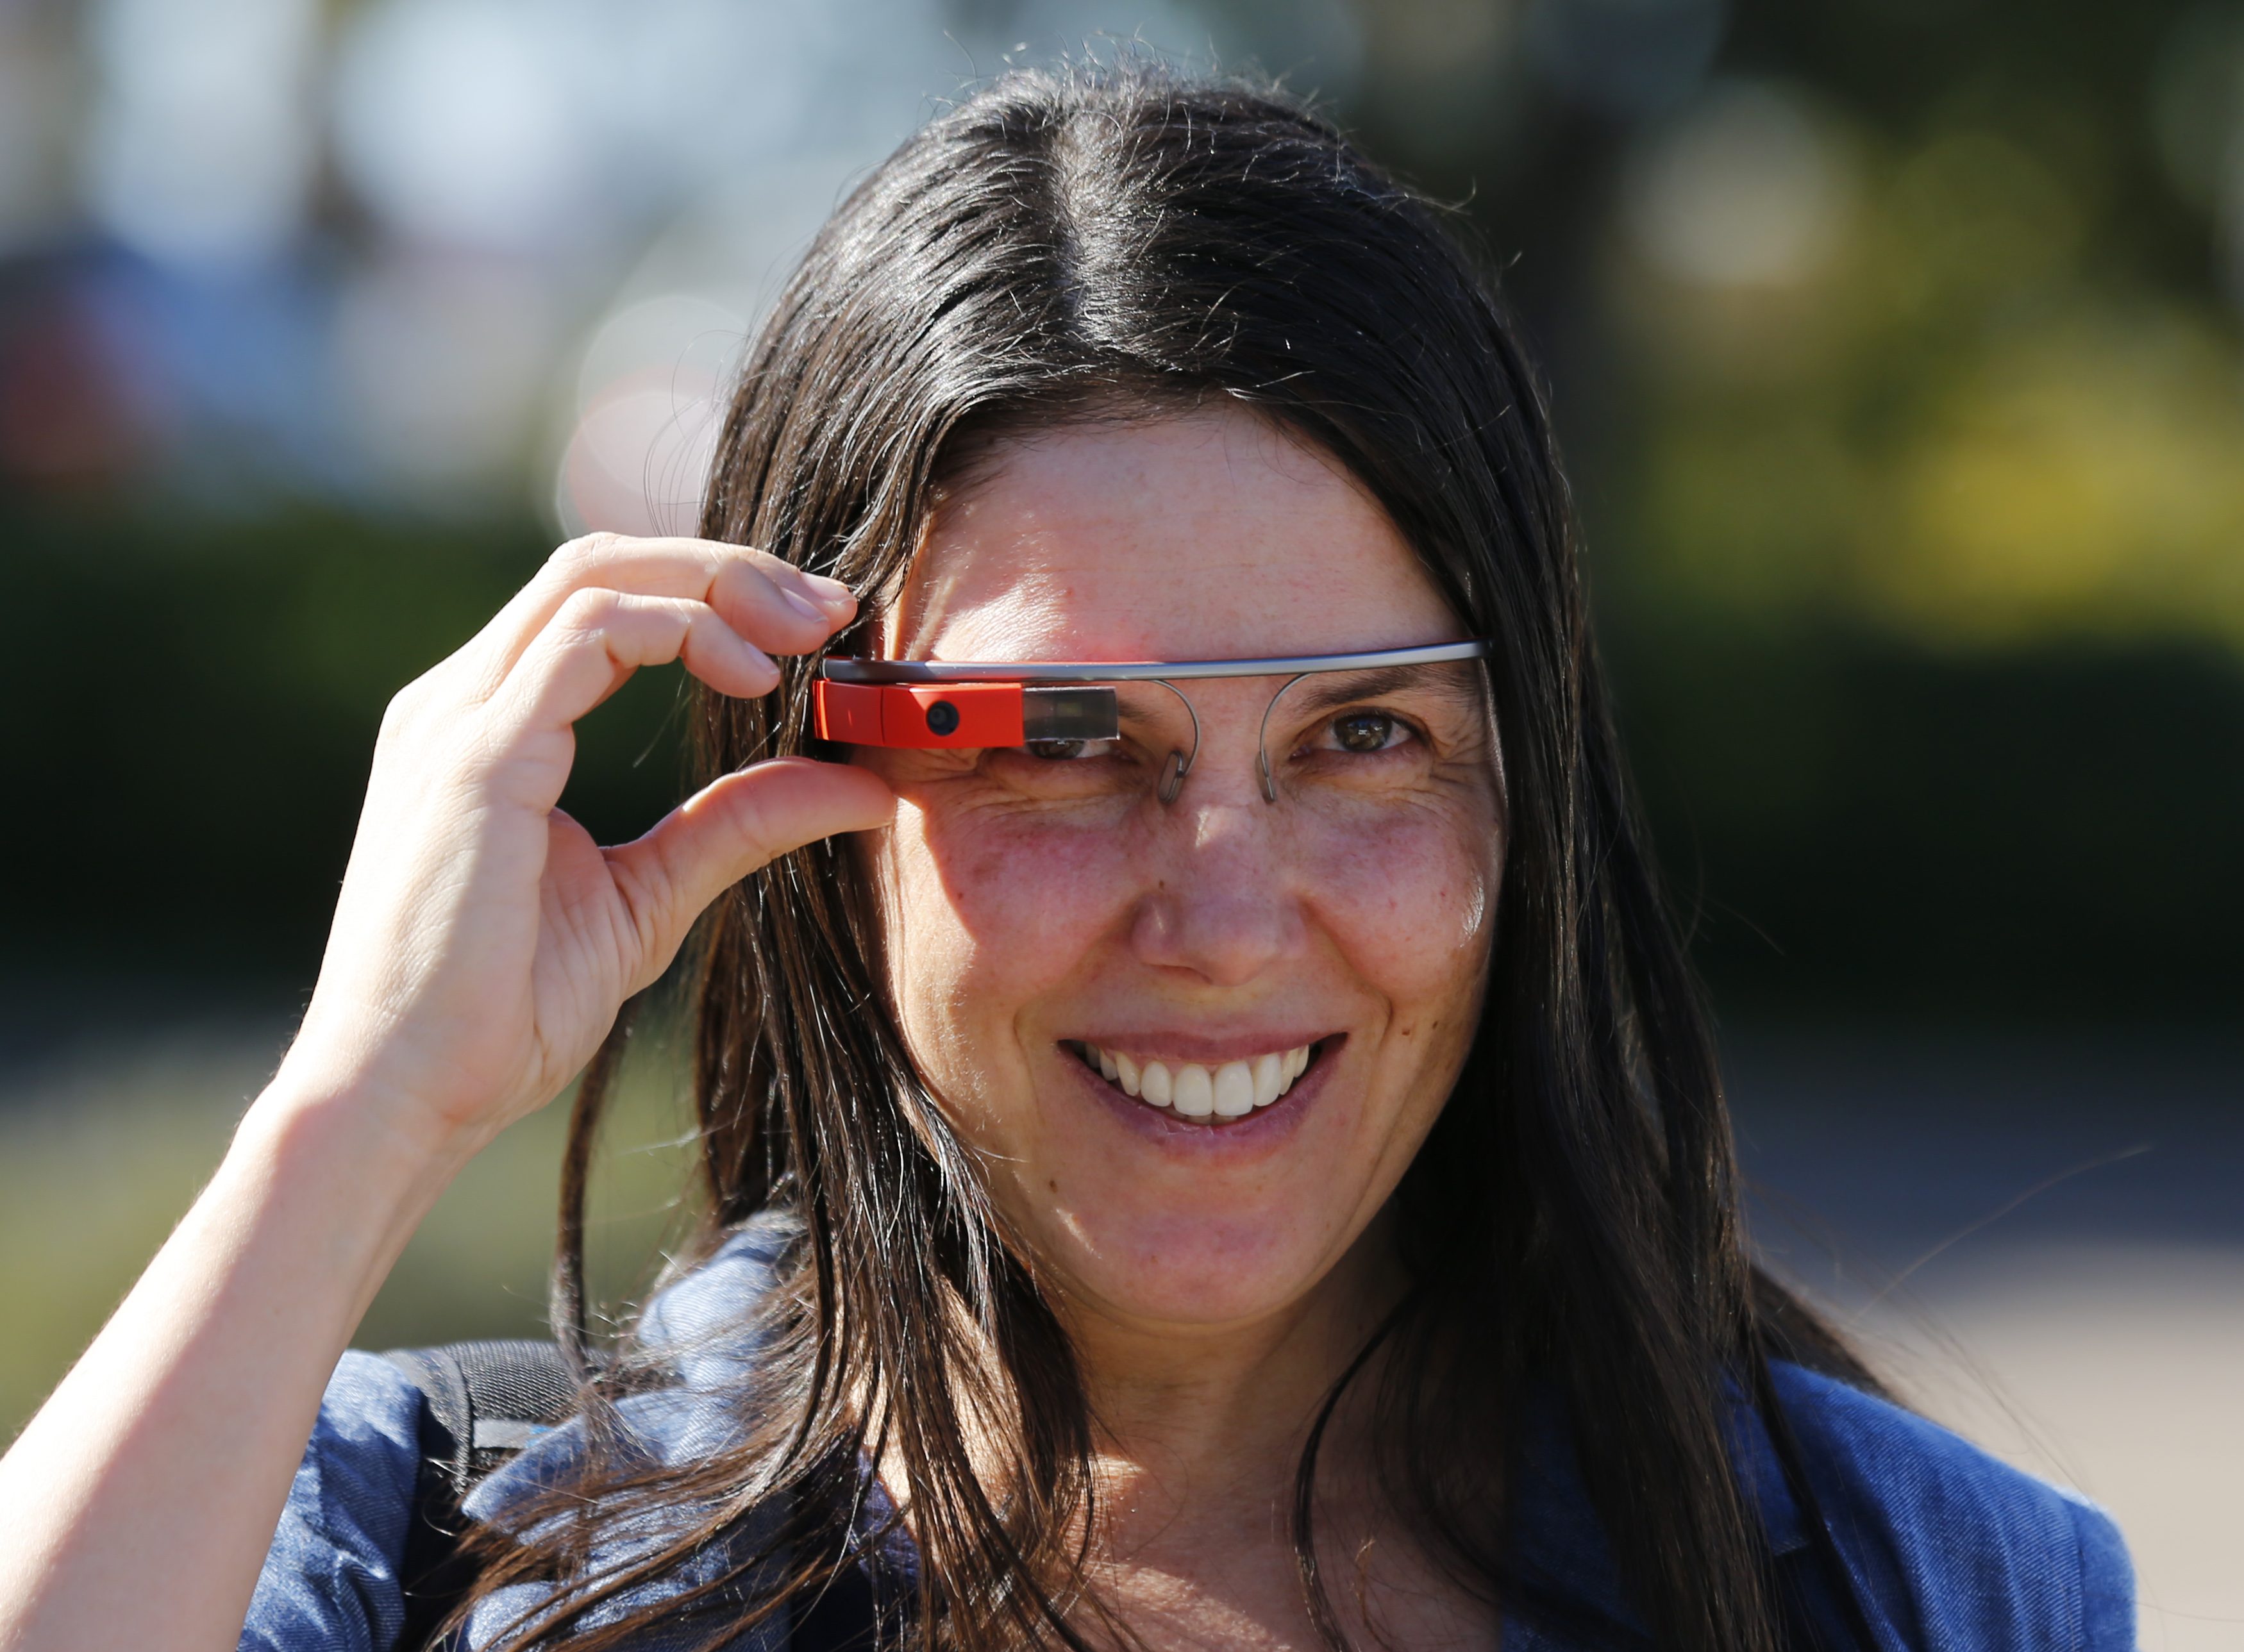 Cecilia Abadie wears her Google Glass device. Photo: Reuters